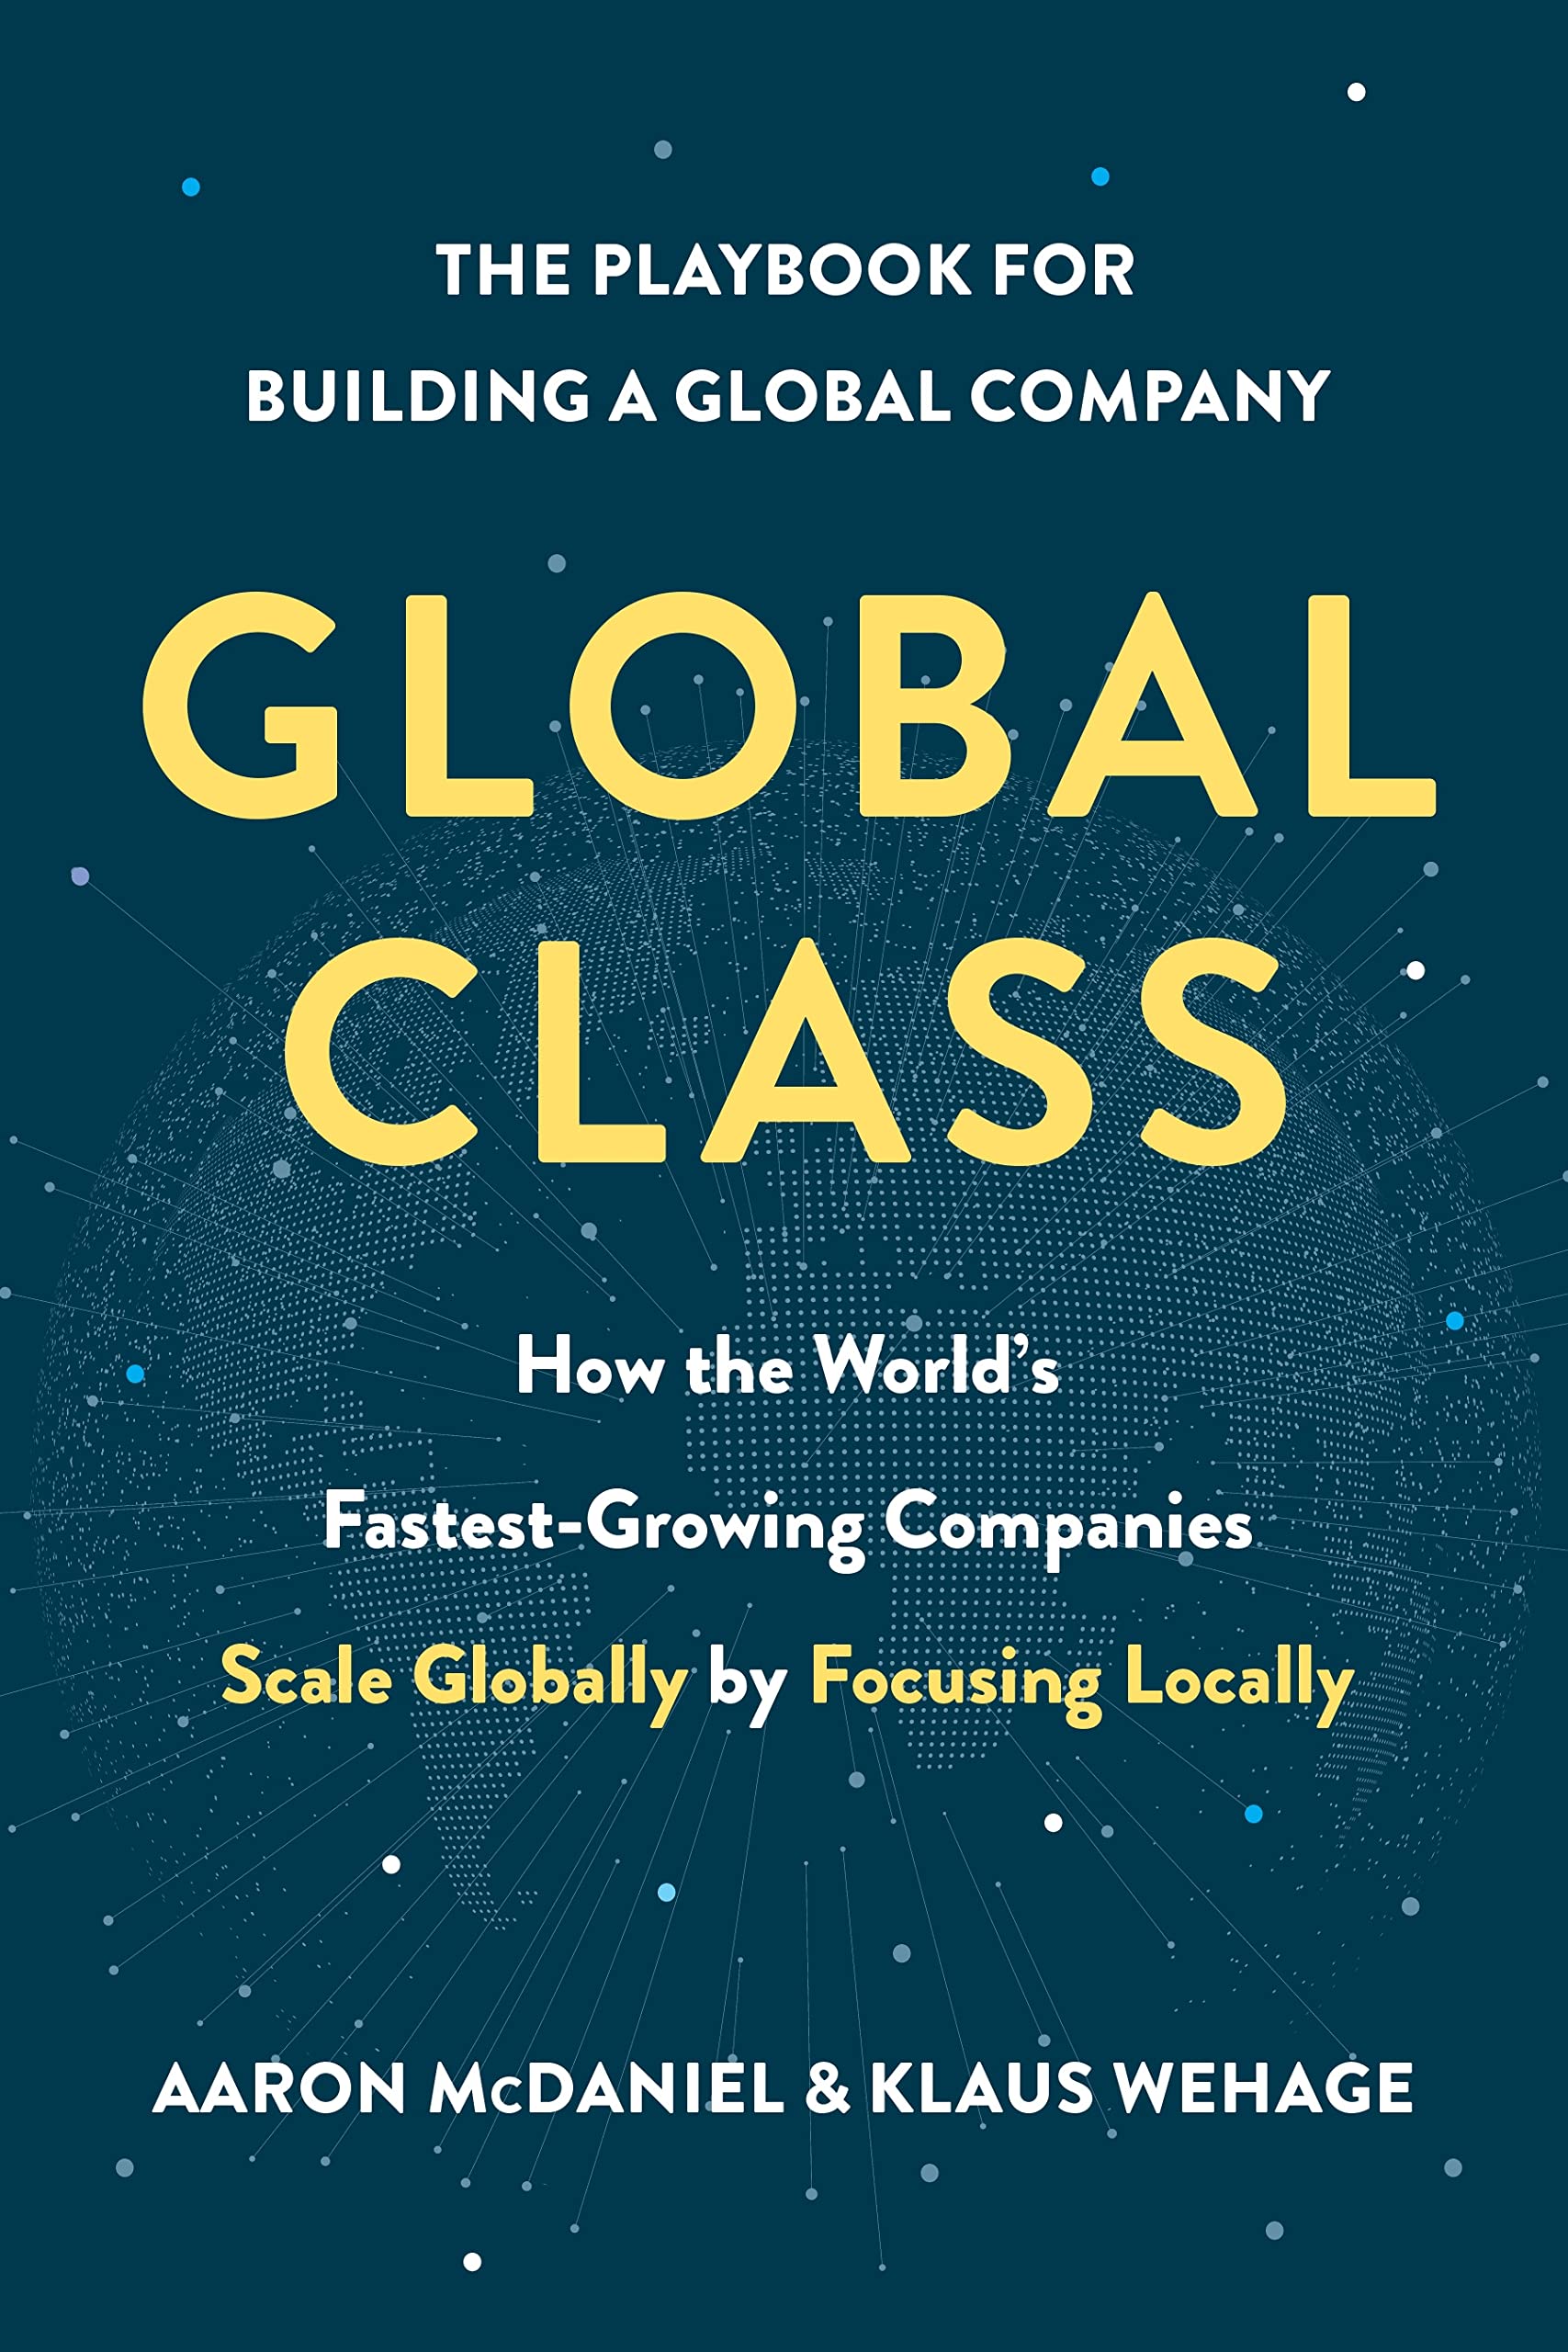 Global Class: How the World’s Fastest-Growing Companies Scale Globally by Focusing Locally